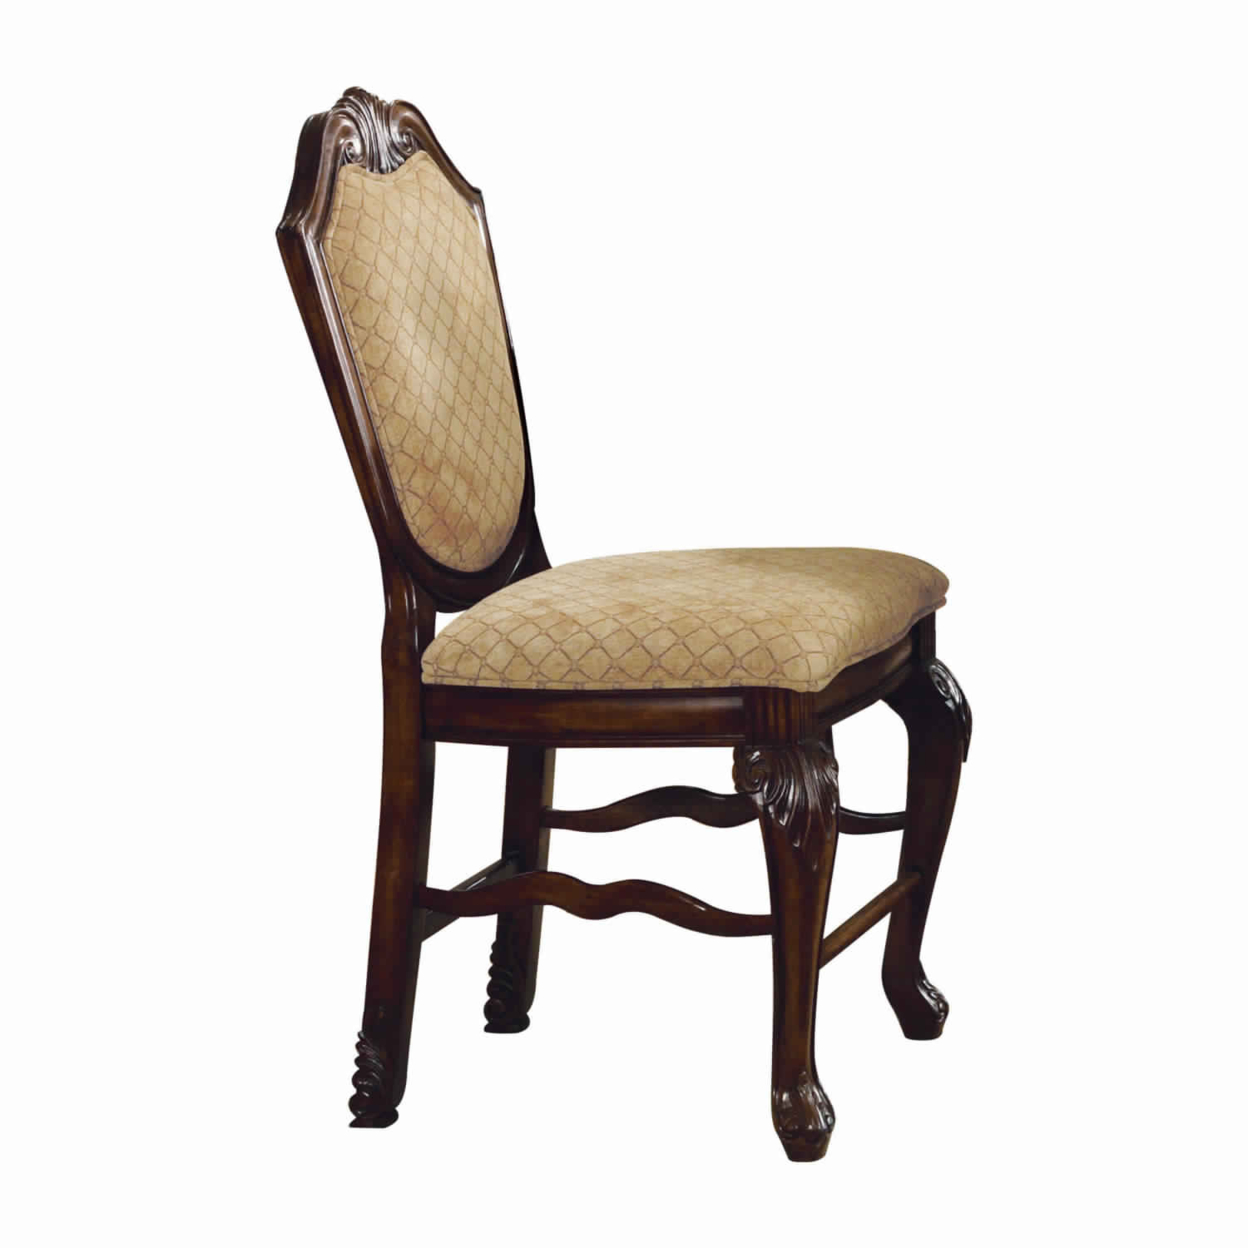 Wooden Counter Height Chair With Fabric Upholstered Seat And Back, Brown And Beige, Set Of Two- Saltoro Sherpi